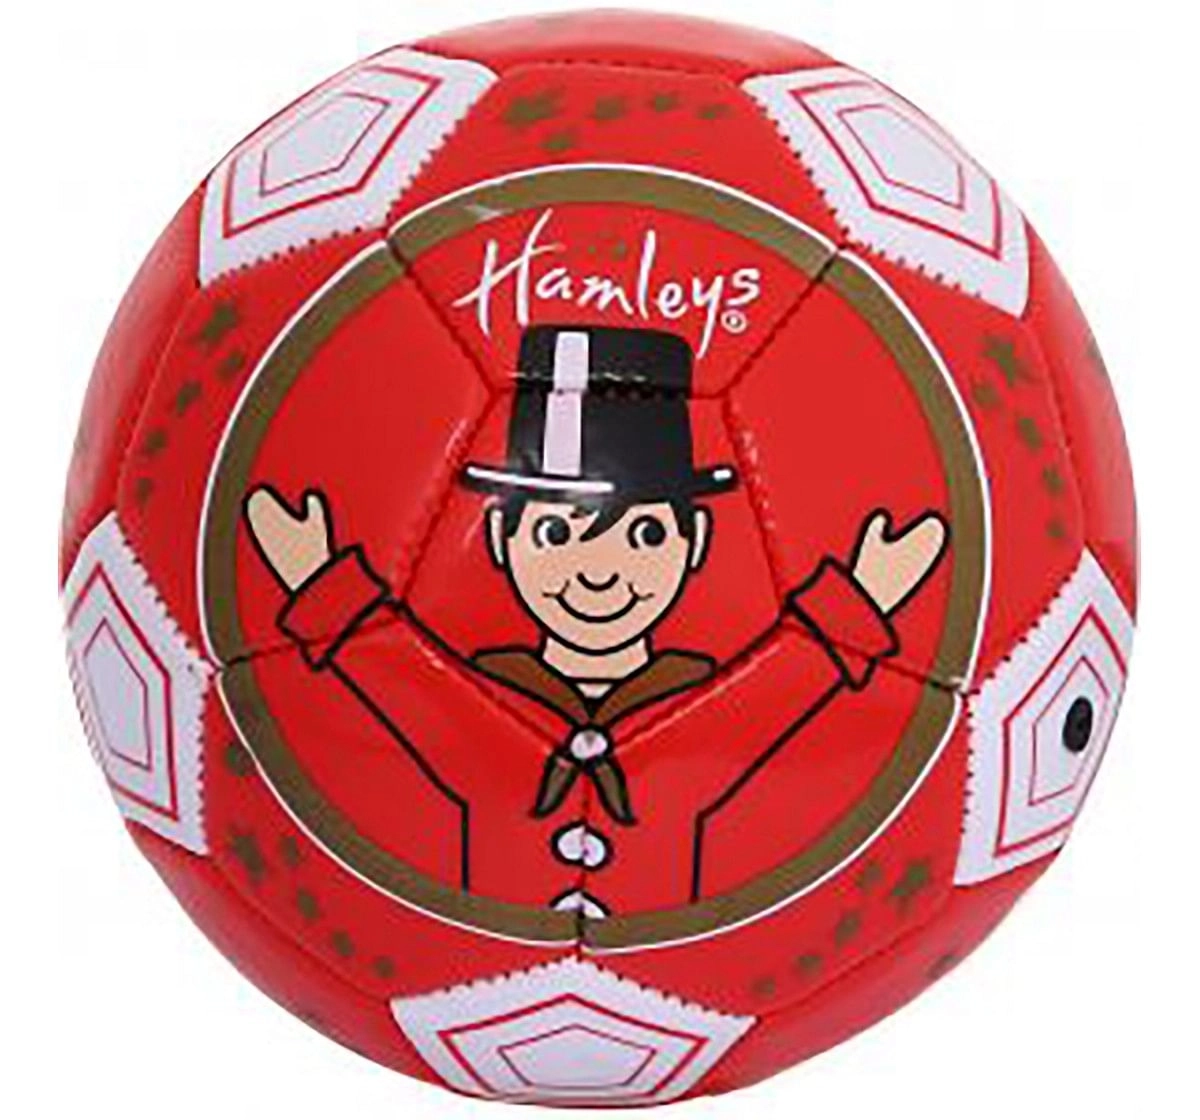 Hamleys Football for Kids age 5Y+ (Red)